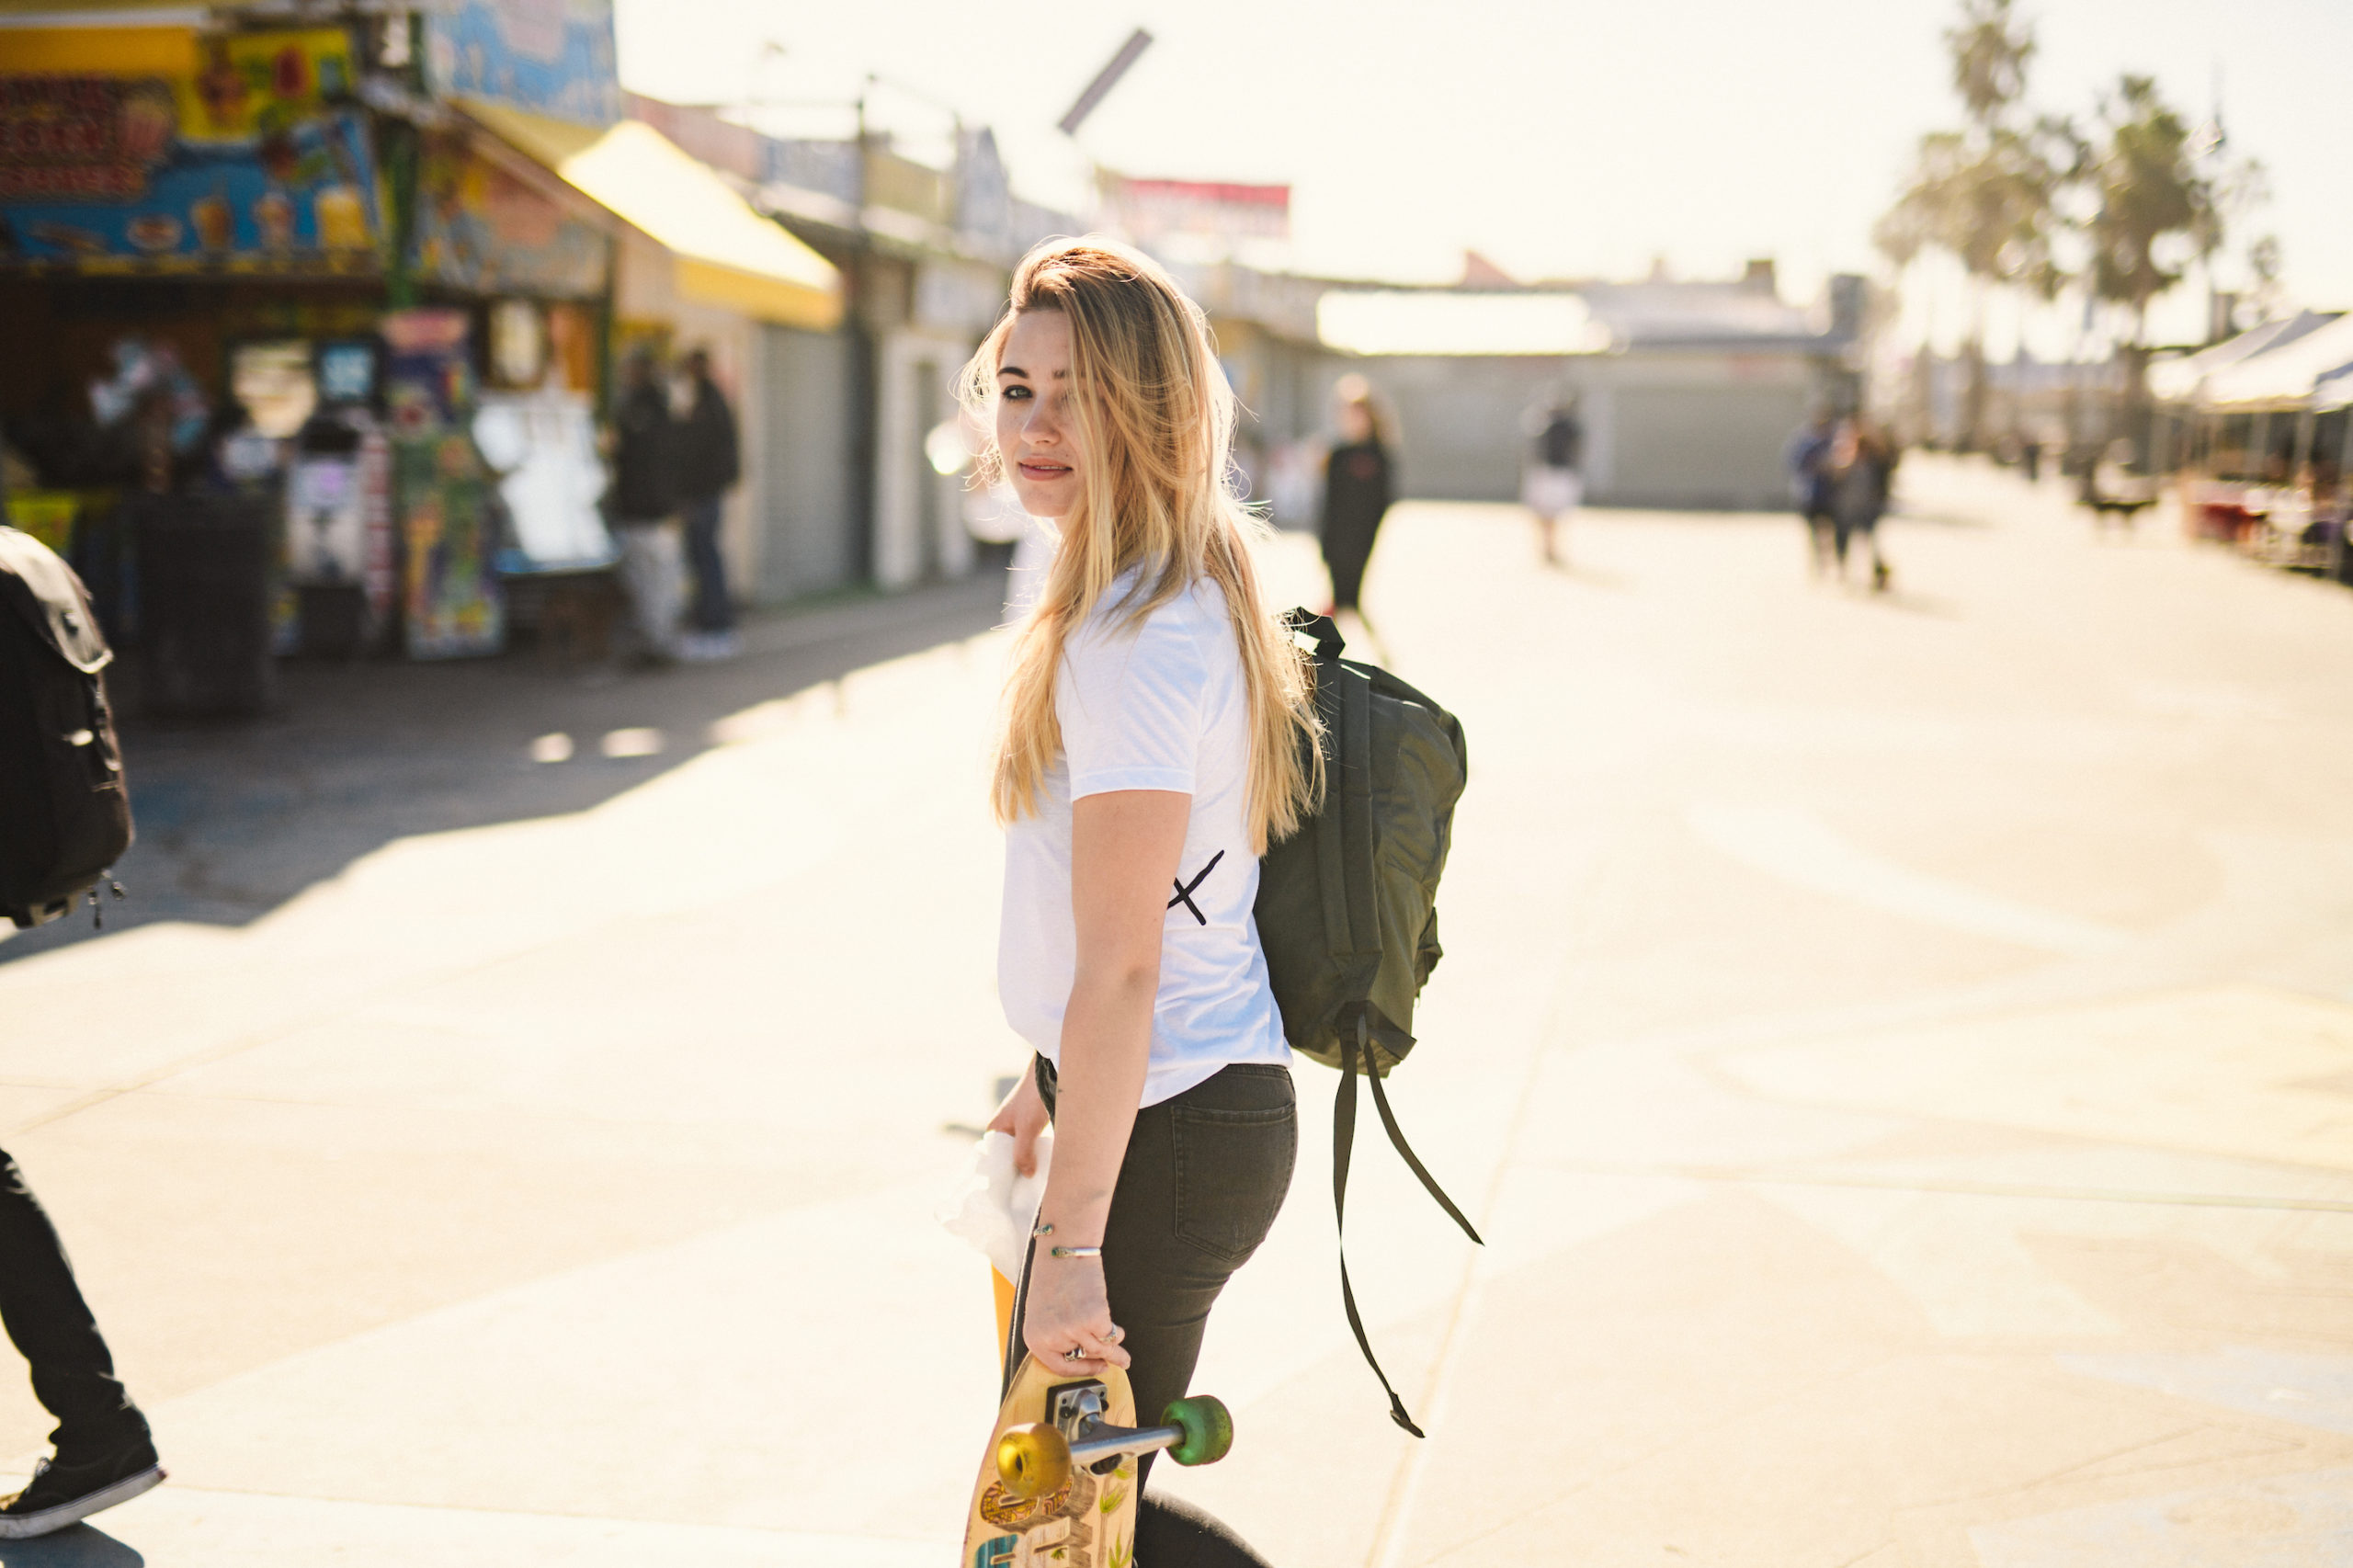 Artistic Bloggers Venice Beach Uncreative Blog Side profile of a woman with long blond hair posing for the camera wearing a green backpack and carrying a skateboard